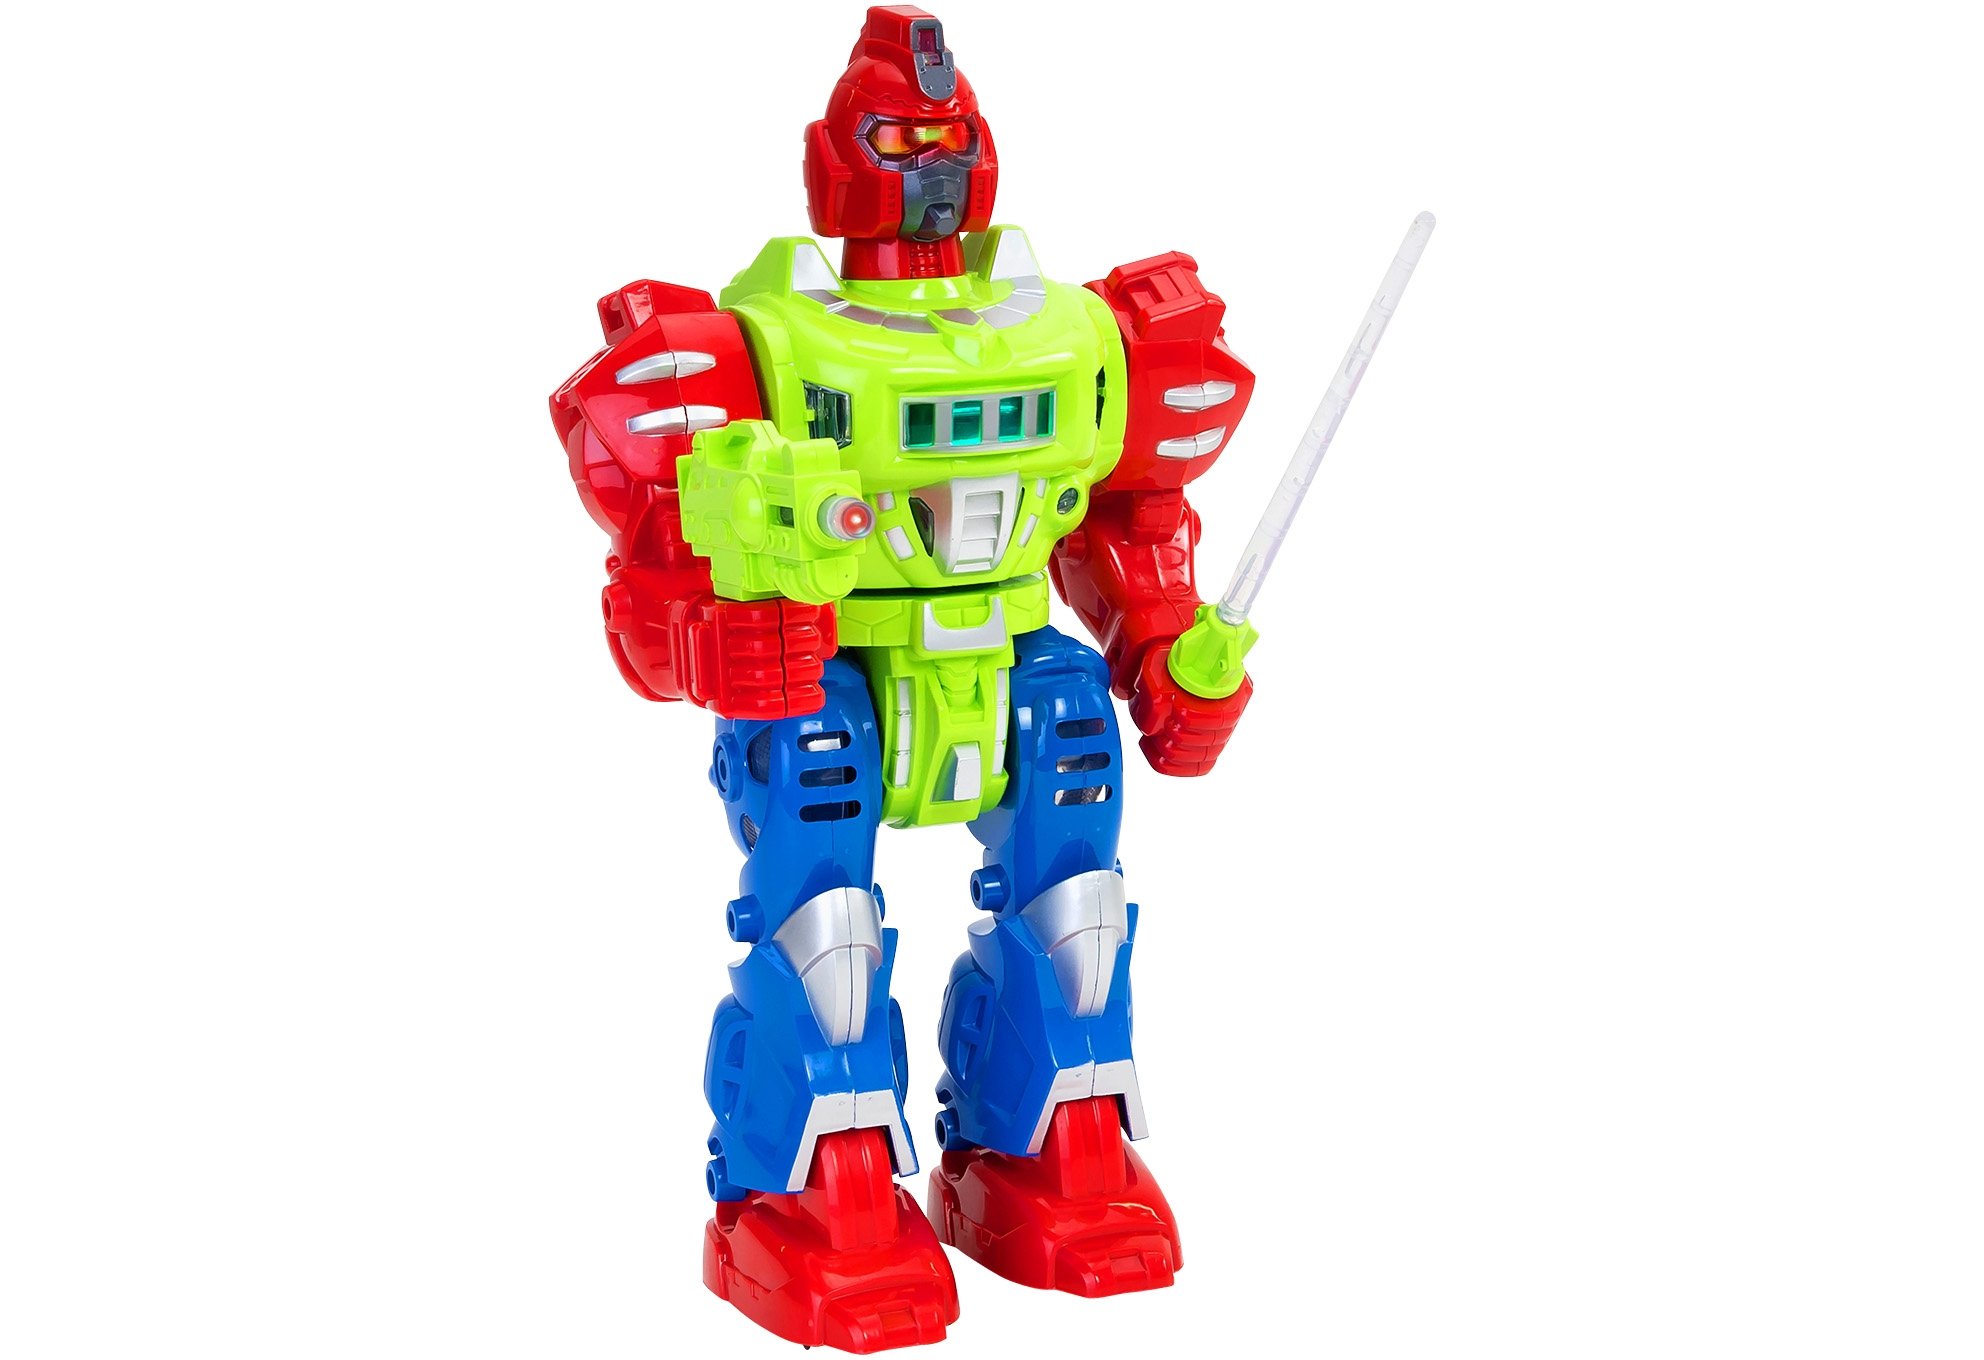 WA Toy 37933 Funktion Roboter